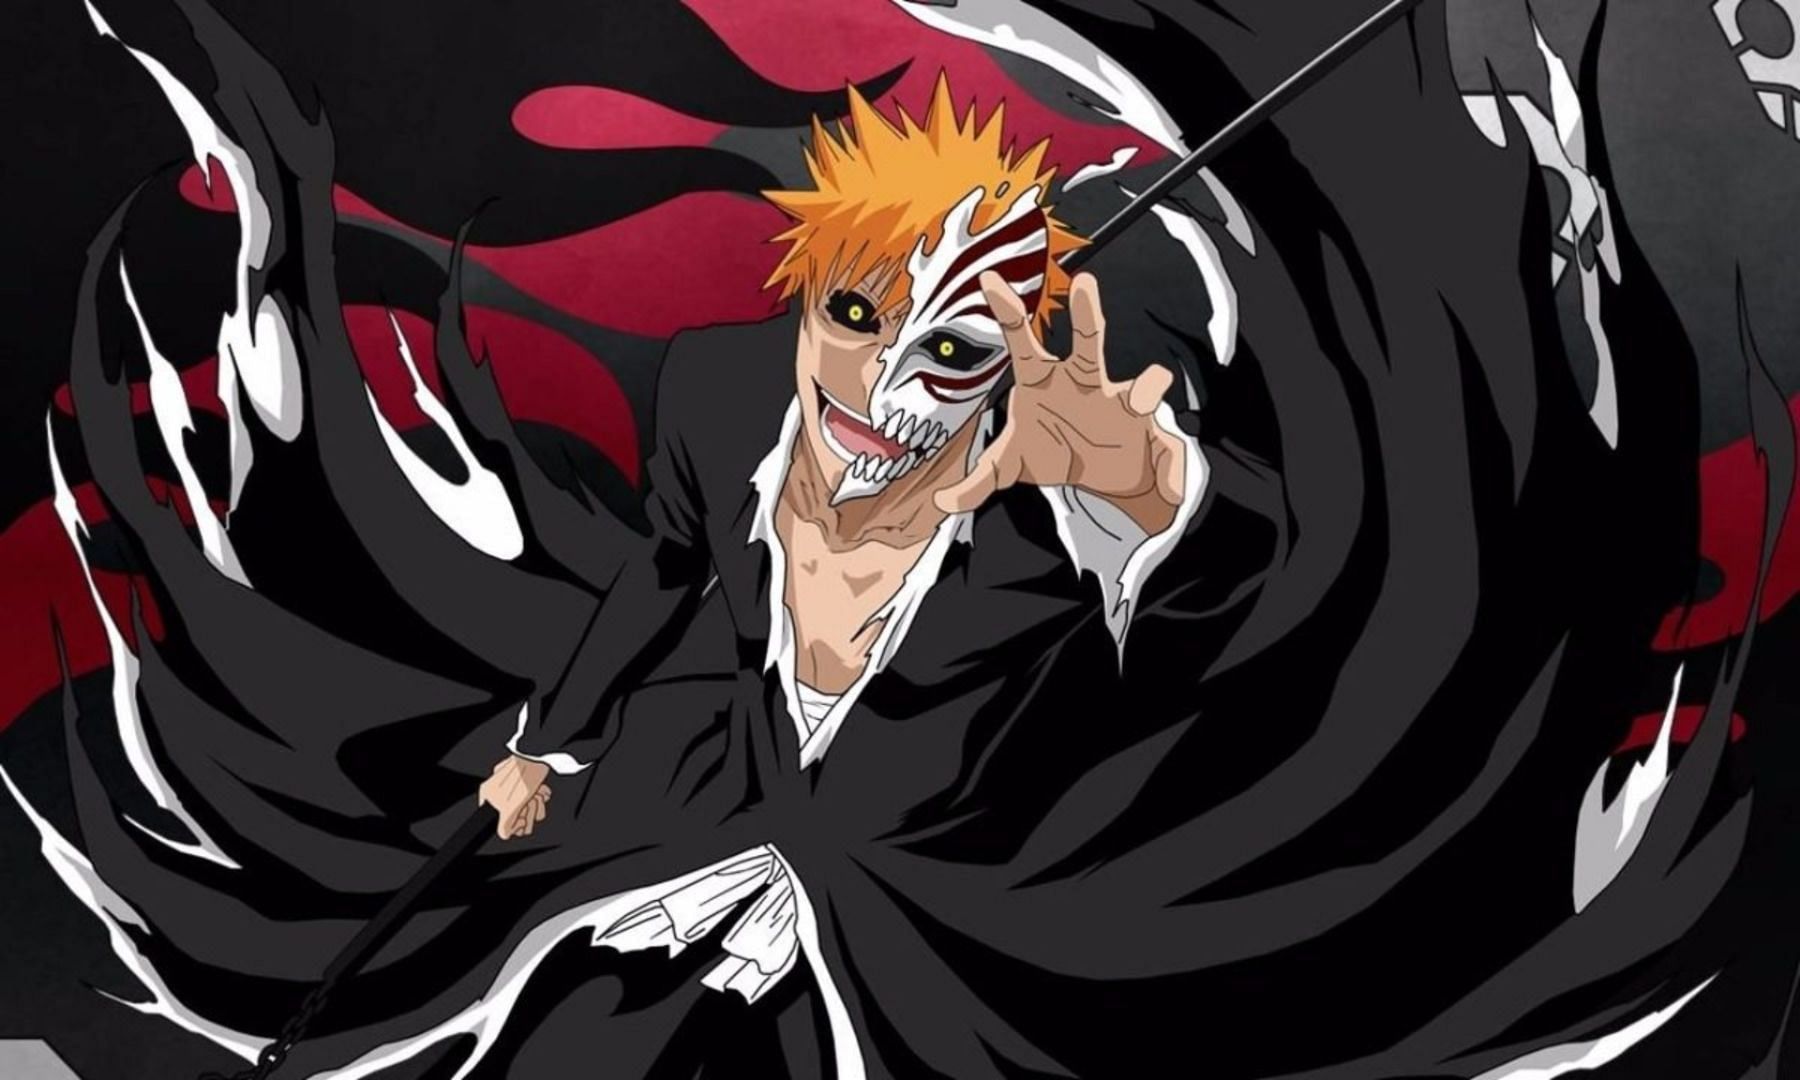 Bleach anime reportedly coming back with an adaptation of the